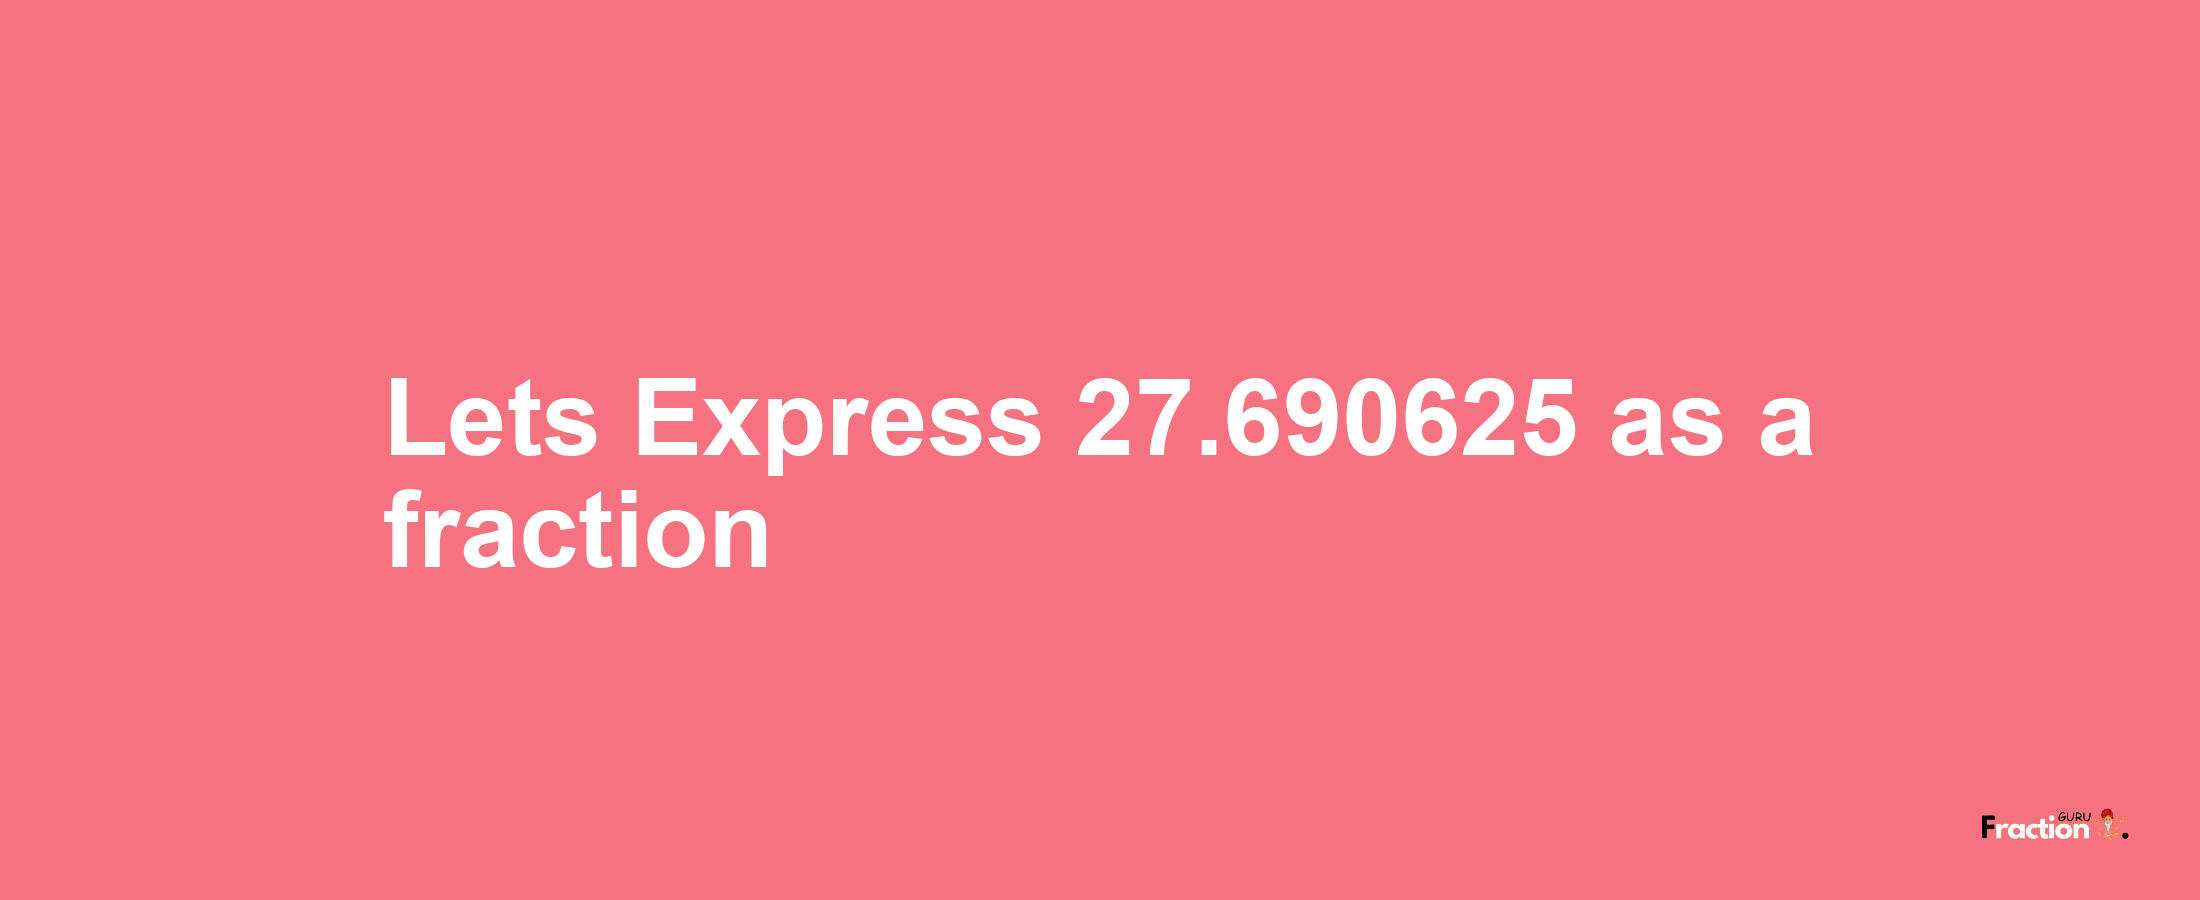 Lets Express 27.690625 as afraction